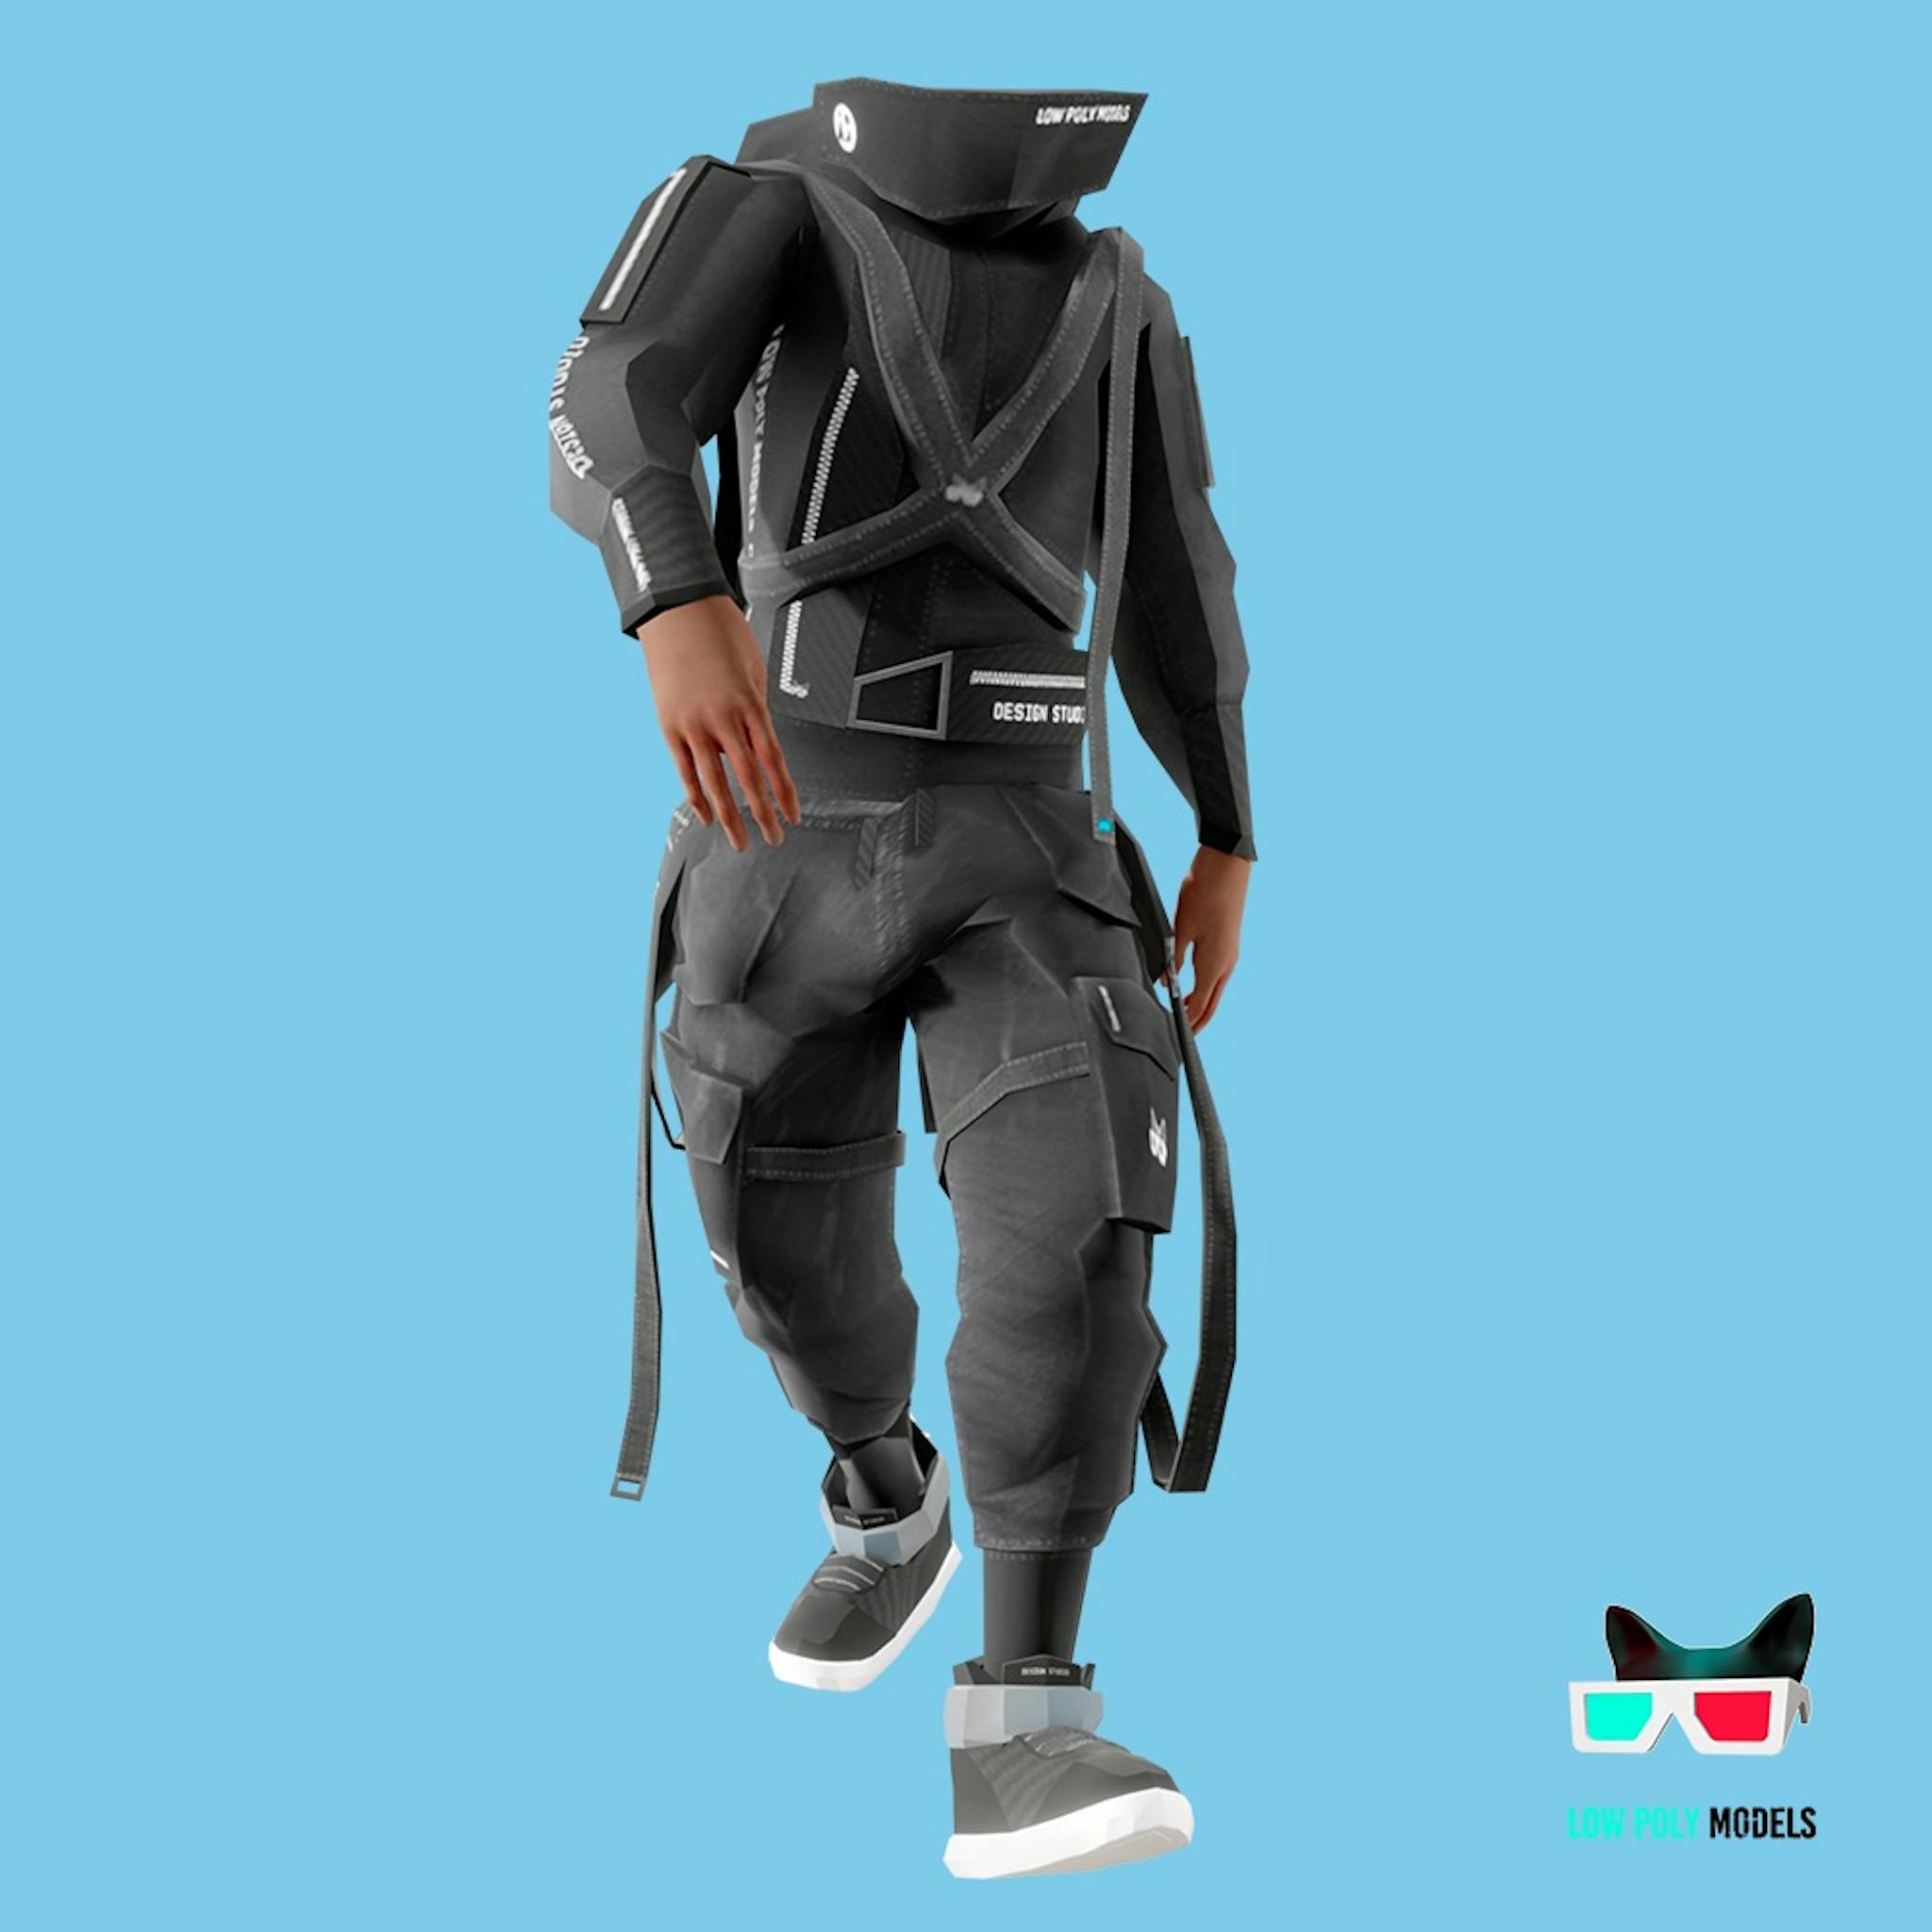 Low Poly Models avatar skin for Union Avatars